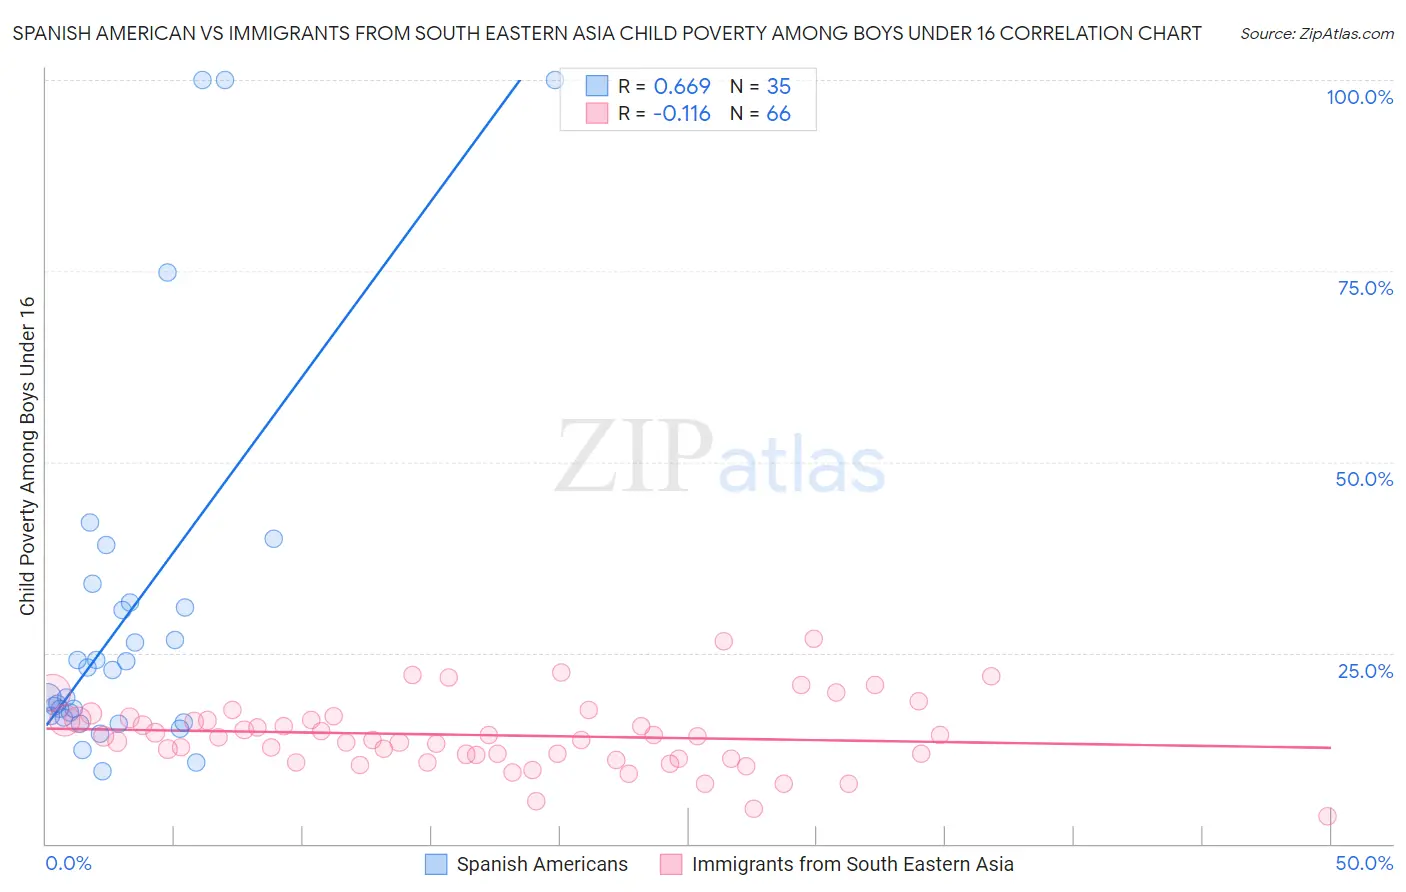 Spanish American vs Immigrants from South Eastern Asia Child Poverty Among Boys Under 16